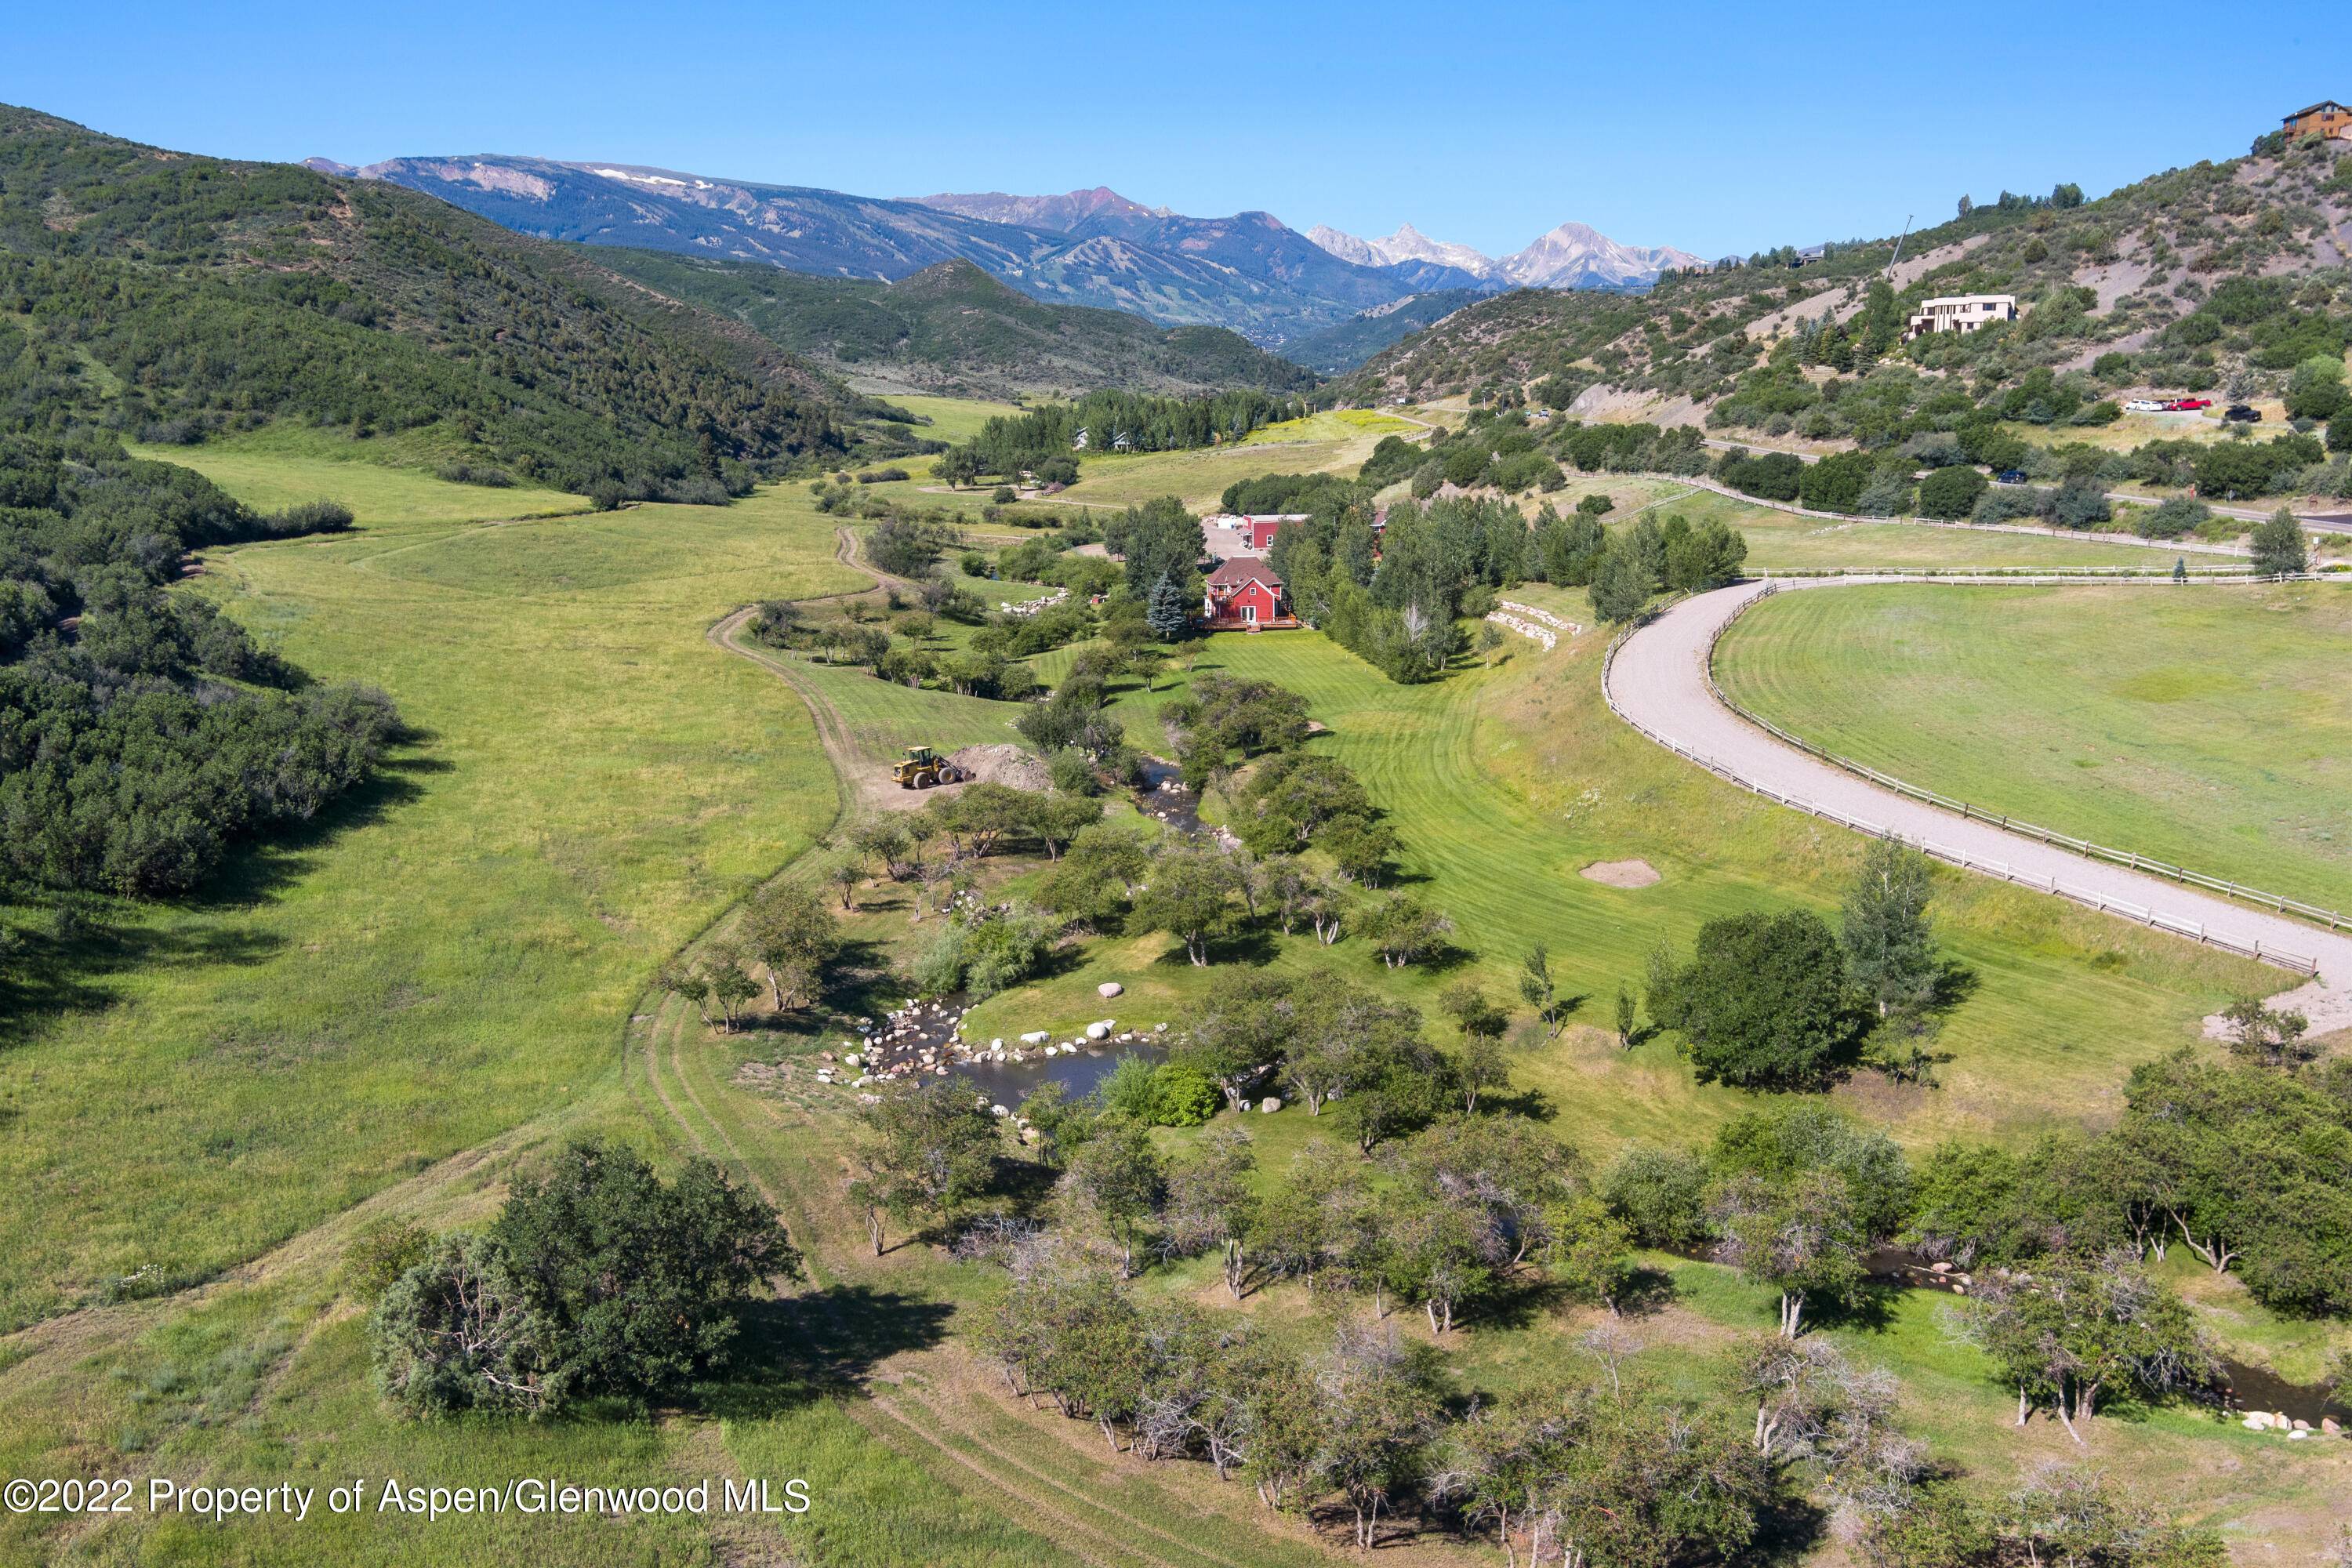 Located between Aspen and Snowmass Village, this 102 acre Brush Creek Ranch encapsulates the spirit of Colorado.